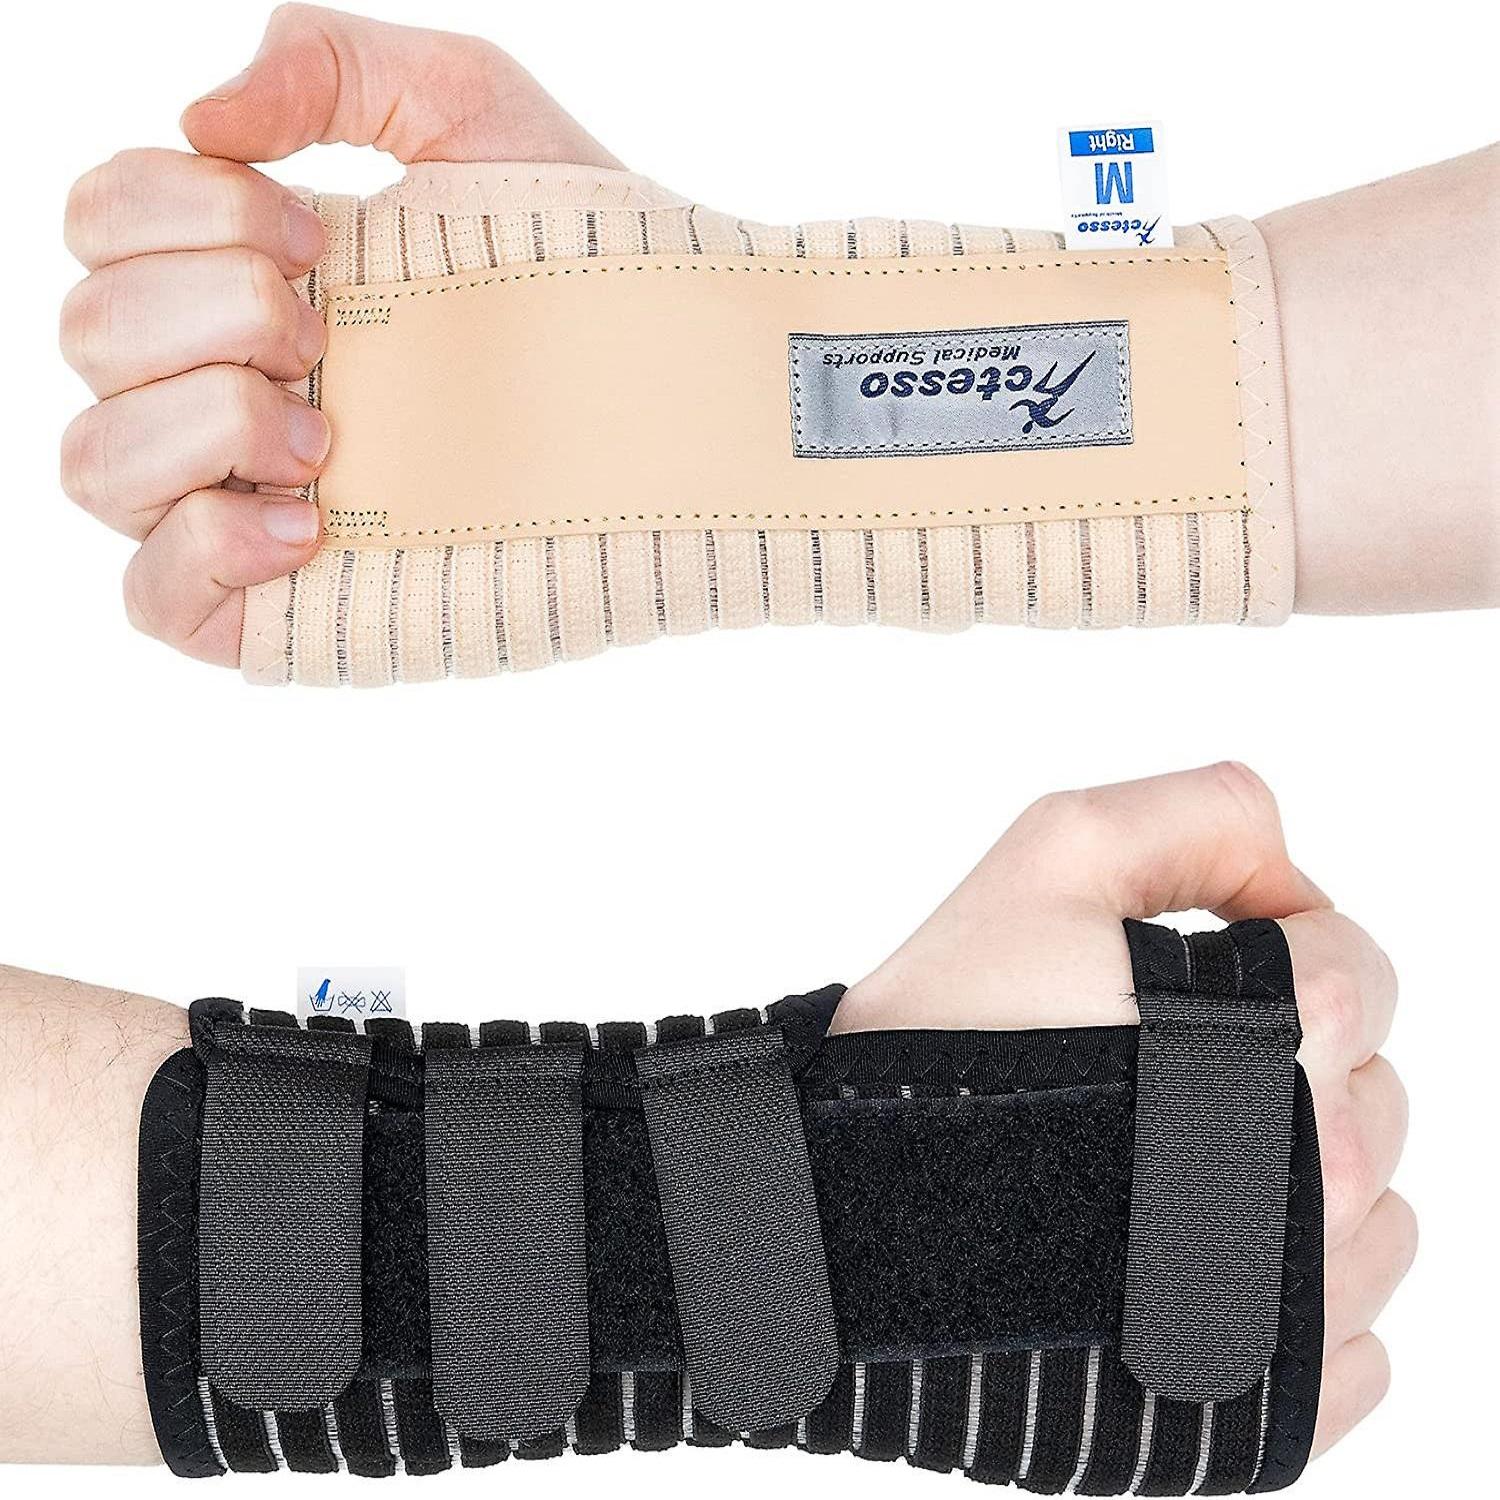 Furniture Component Actesso Breathable Wrist Support Brace Splint - Ideal For Carpal Tunnel, Sprains, And Tendonitis (black, Medium Right)